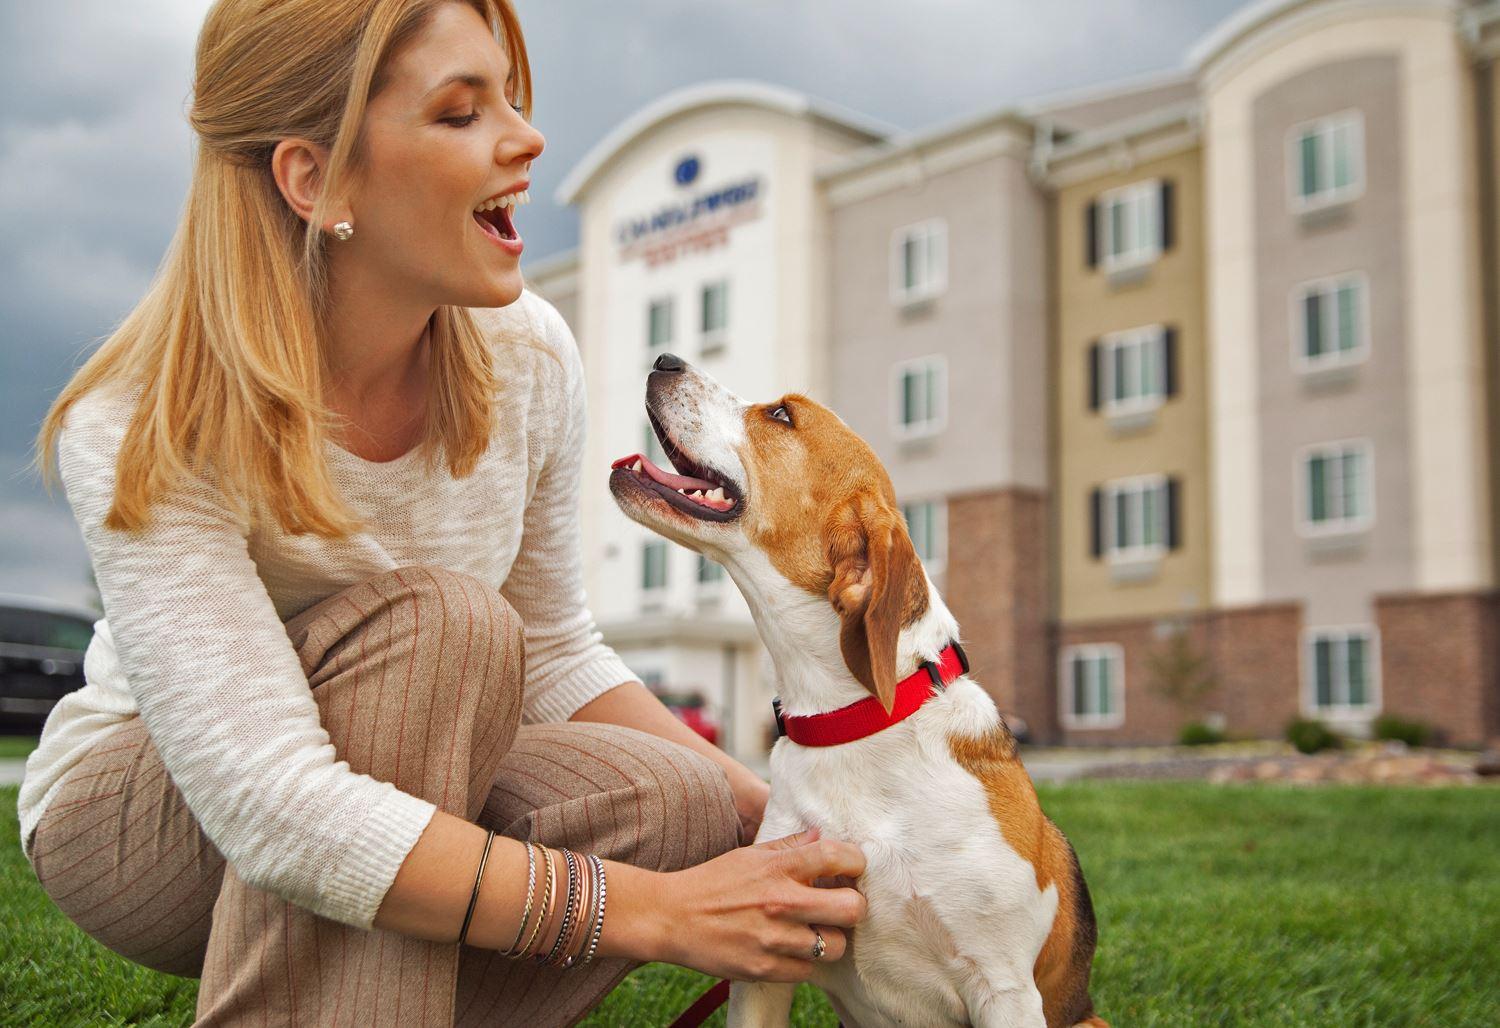 Can I Bring My Dog to Candlewood Suites?